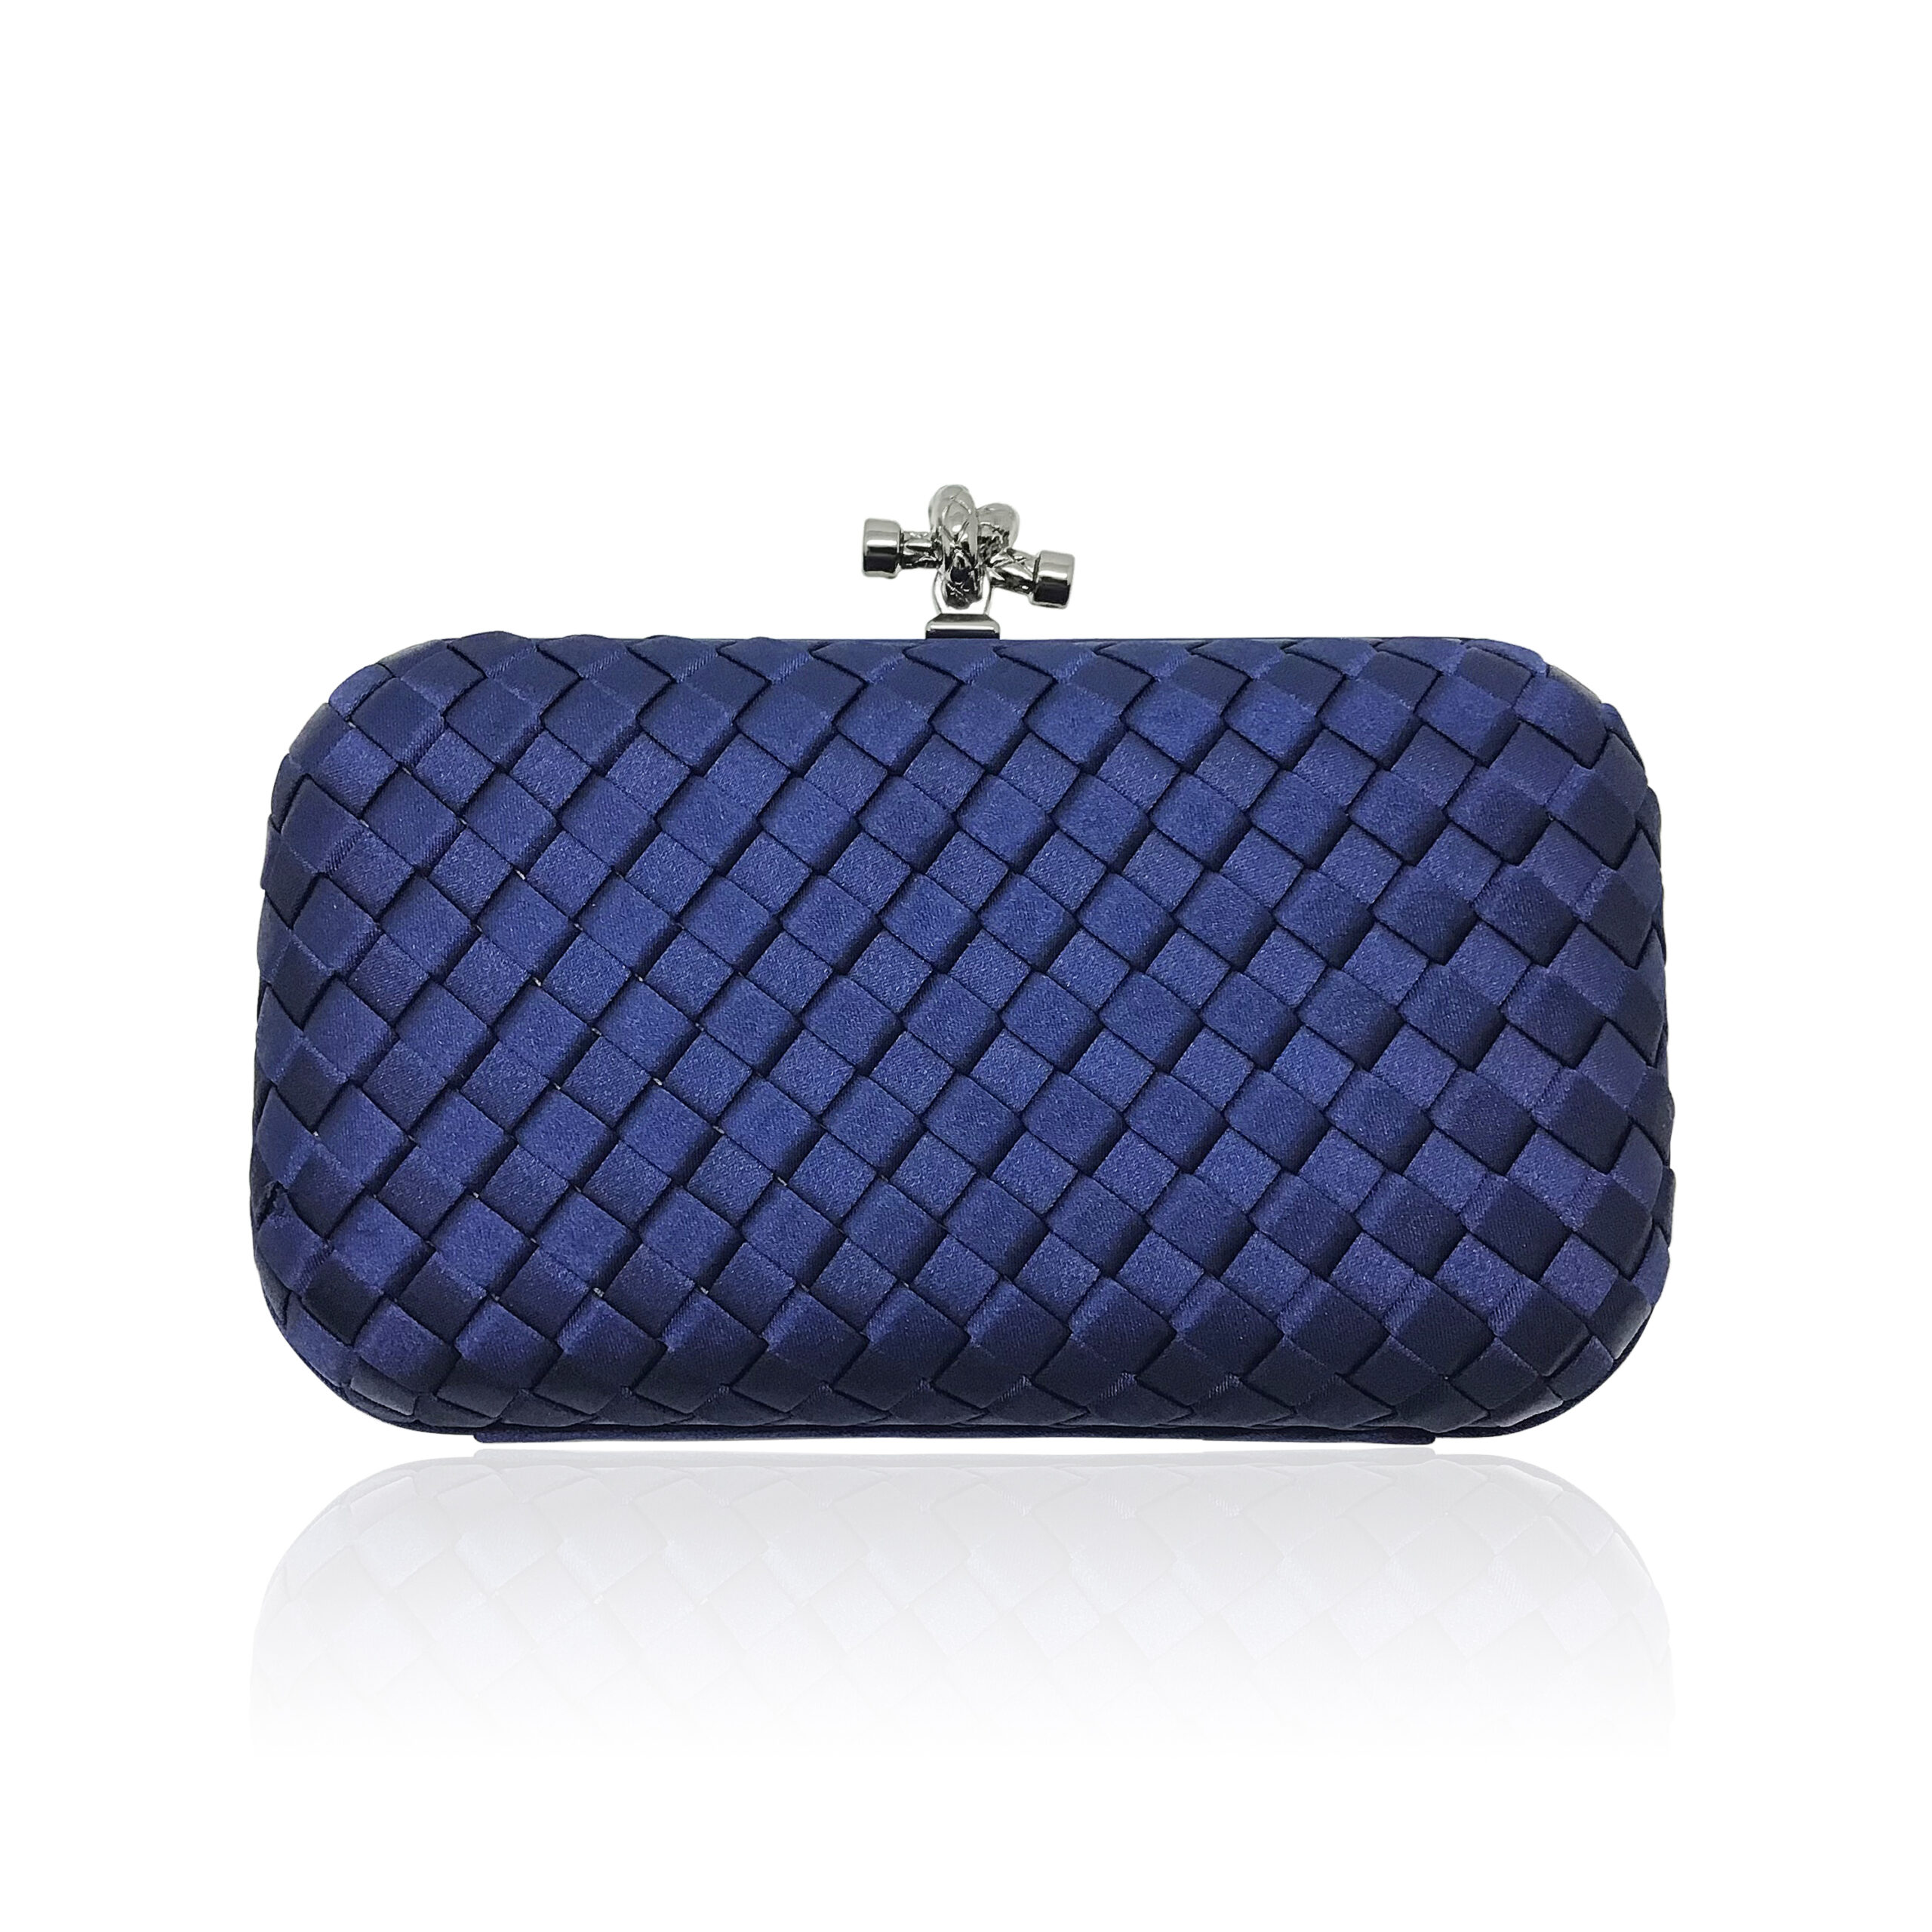 Small Navy Clutch Bag|Asher|Jeanette Maree|Shop Online Now